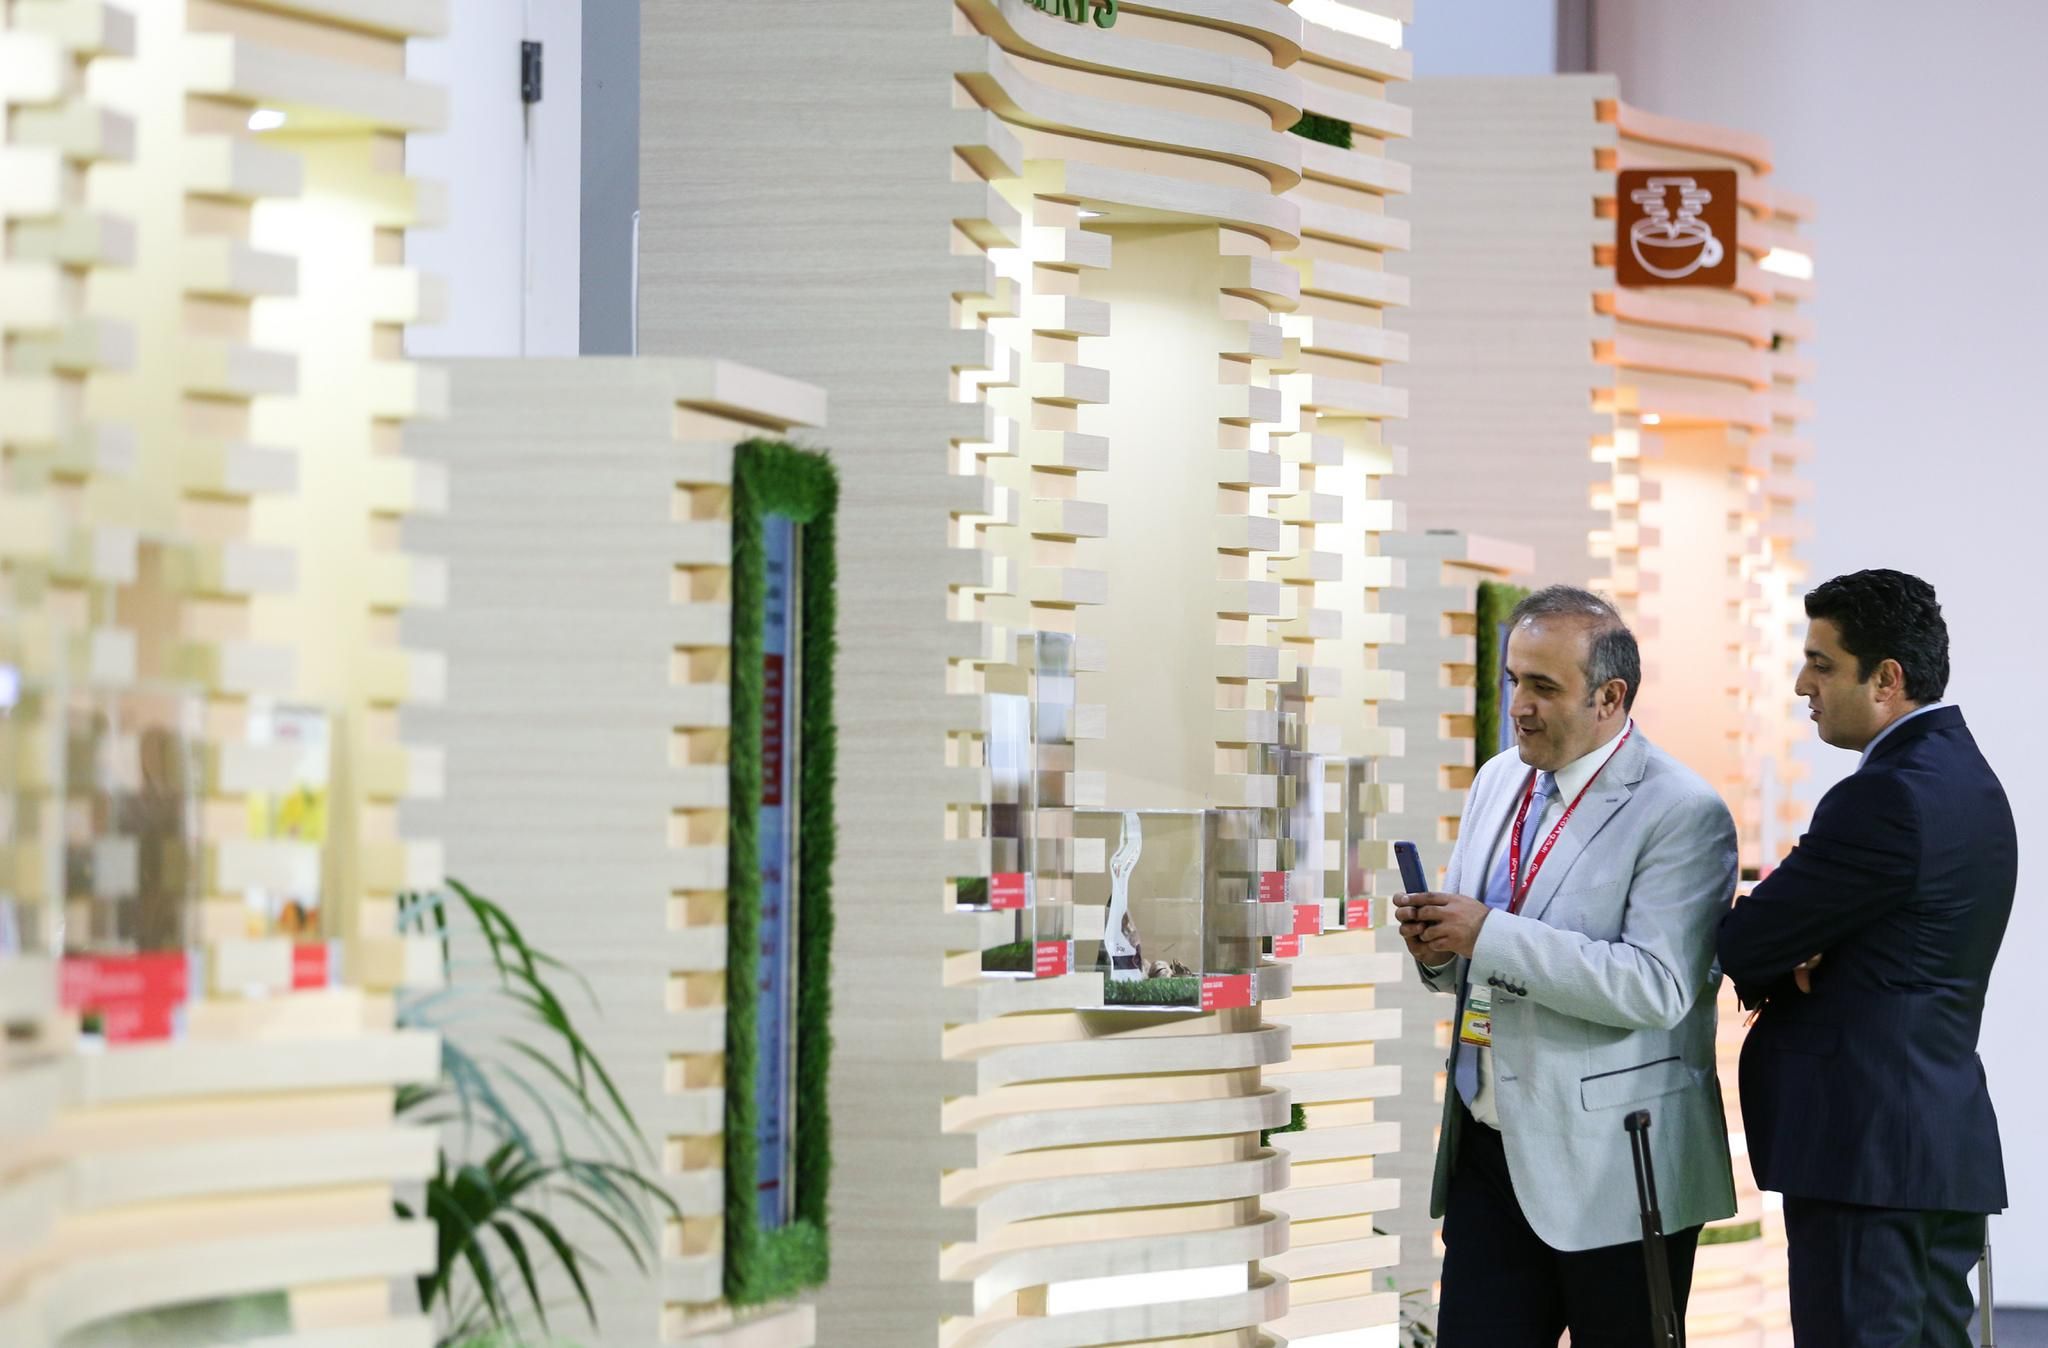 Dedicated ‘Discover Zone’ shines spotlight on best new-to-market products at Gulfood